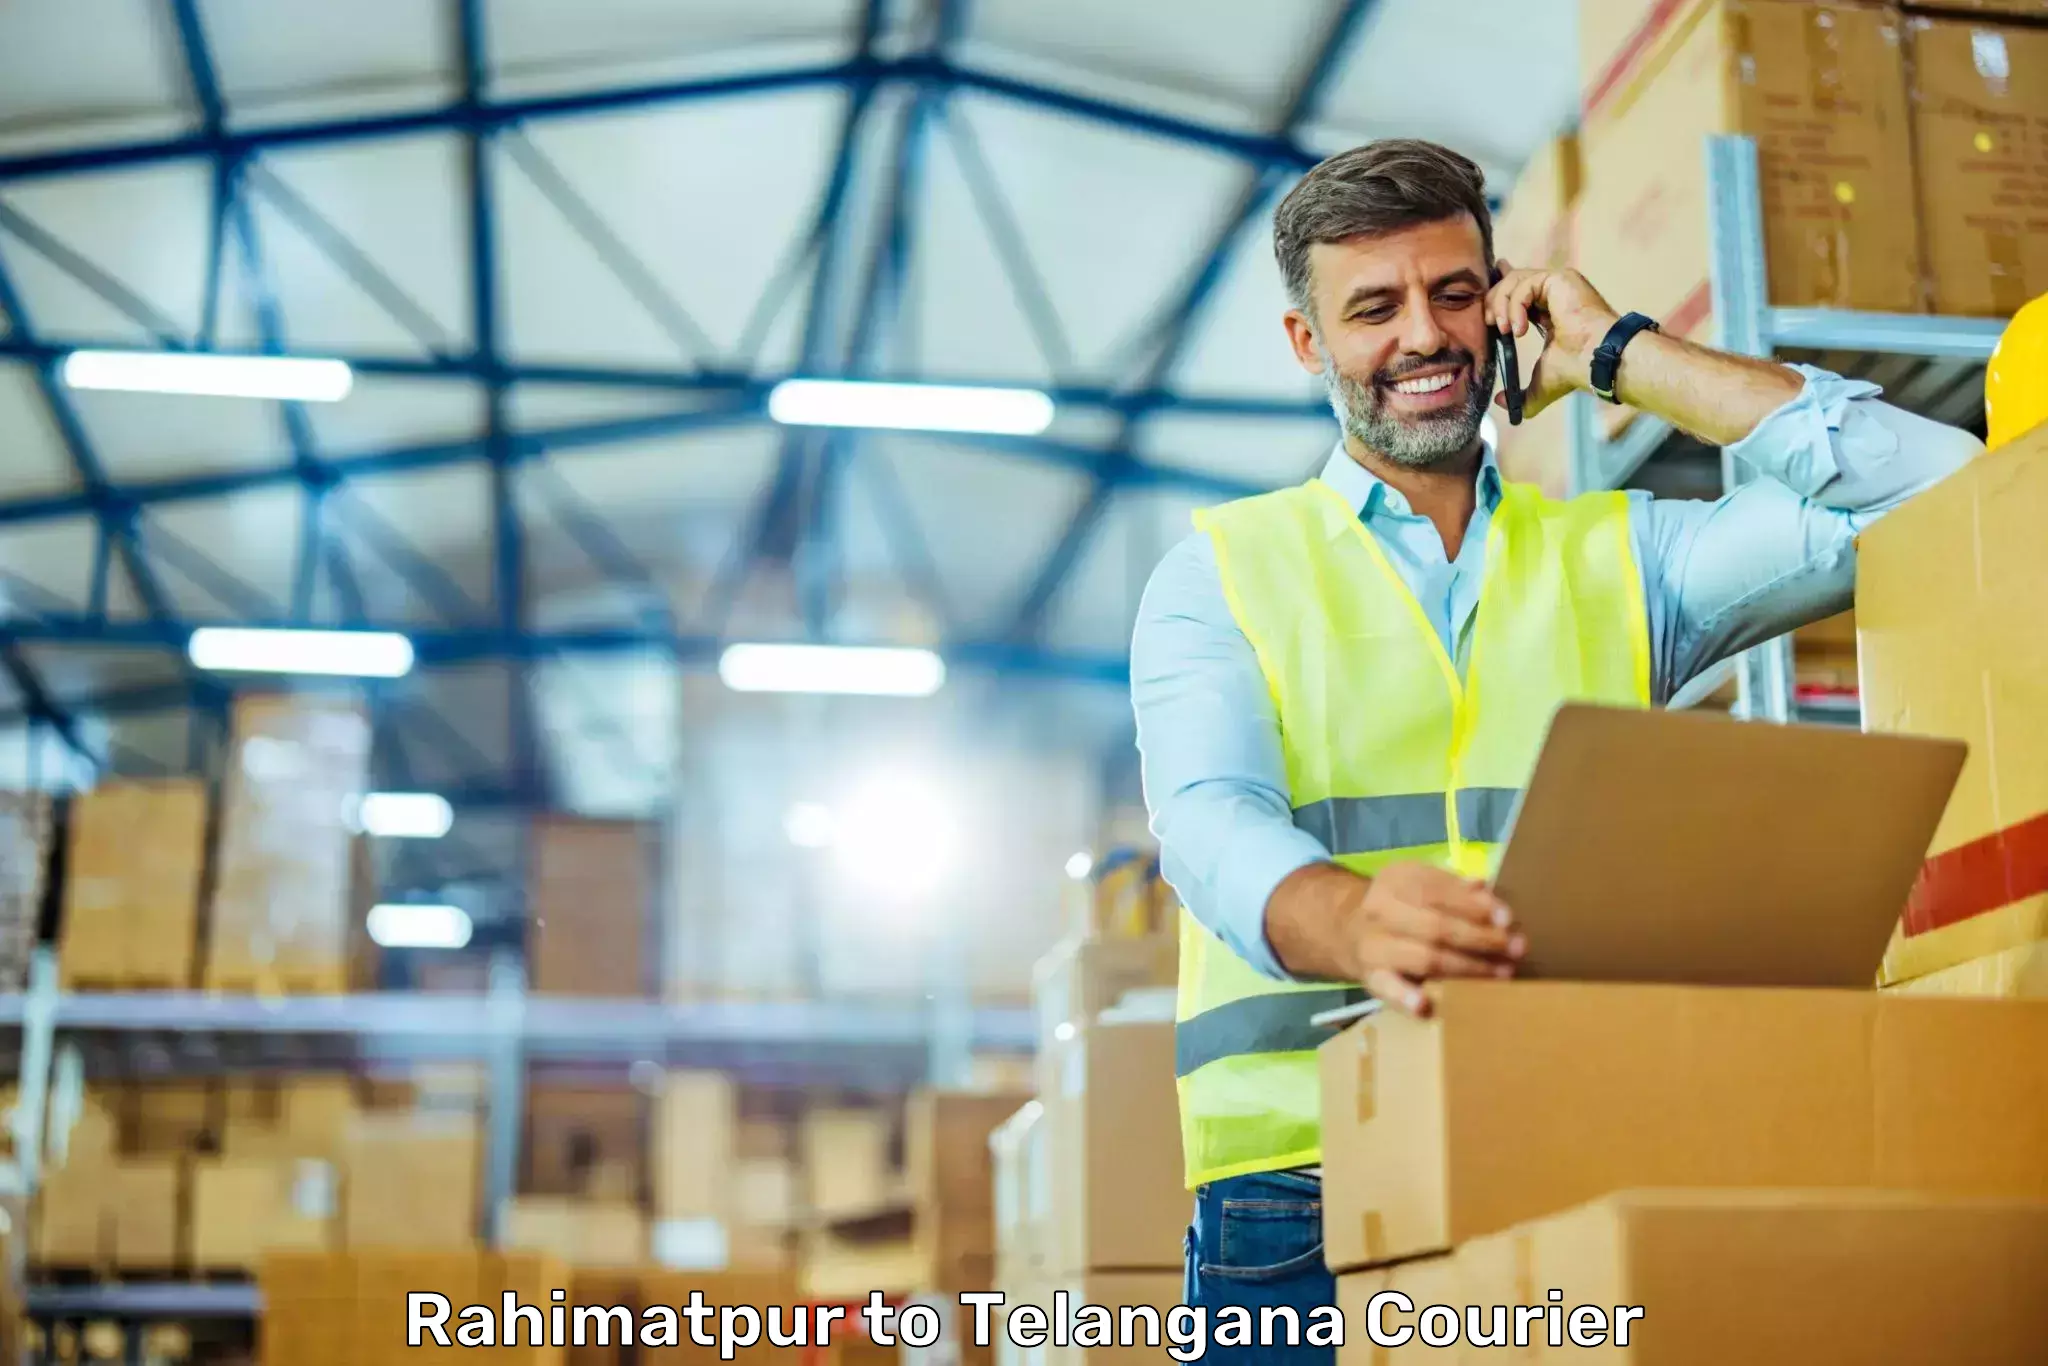 State-of-the-art courier technology Rahimatpur to Yellareddy